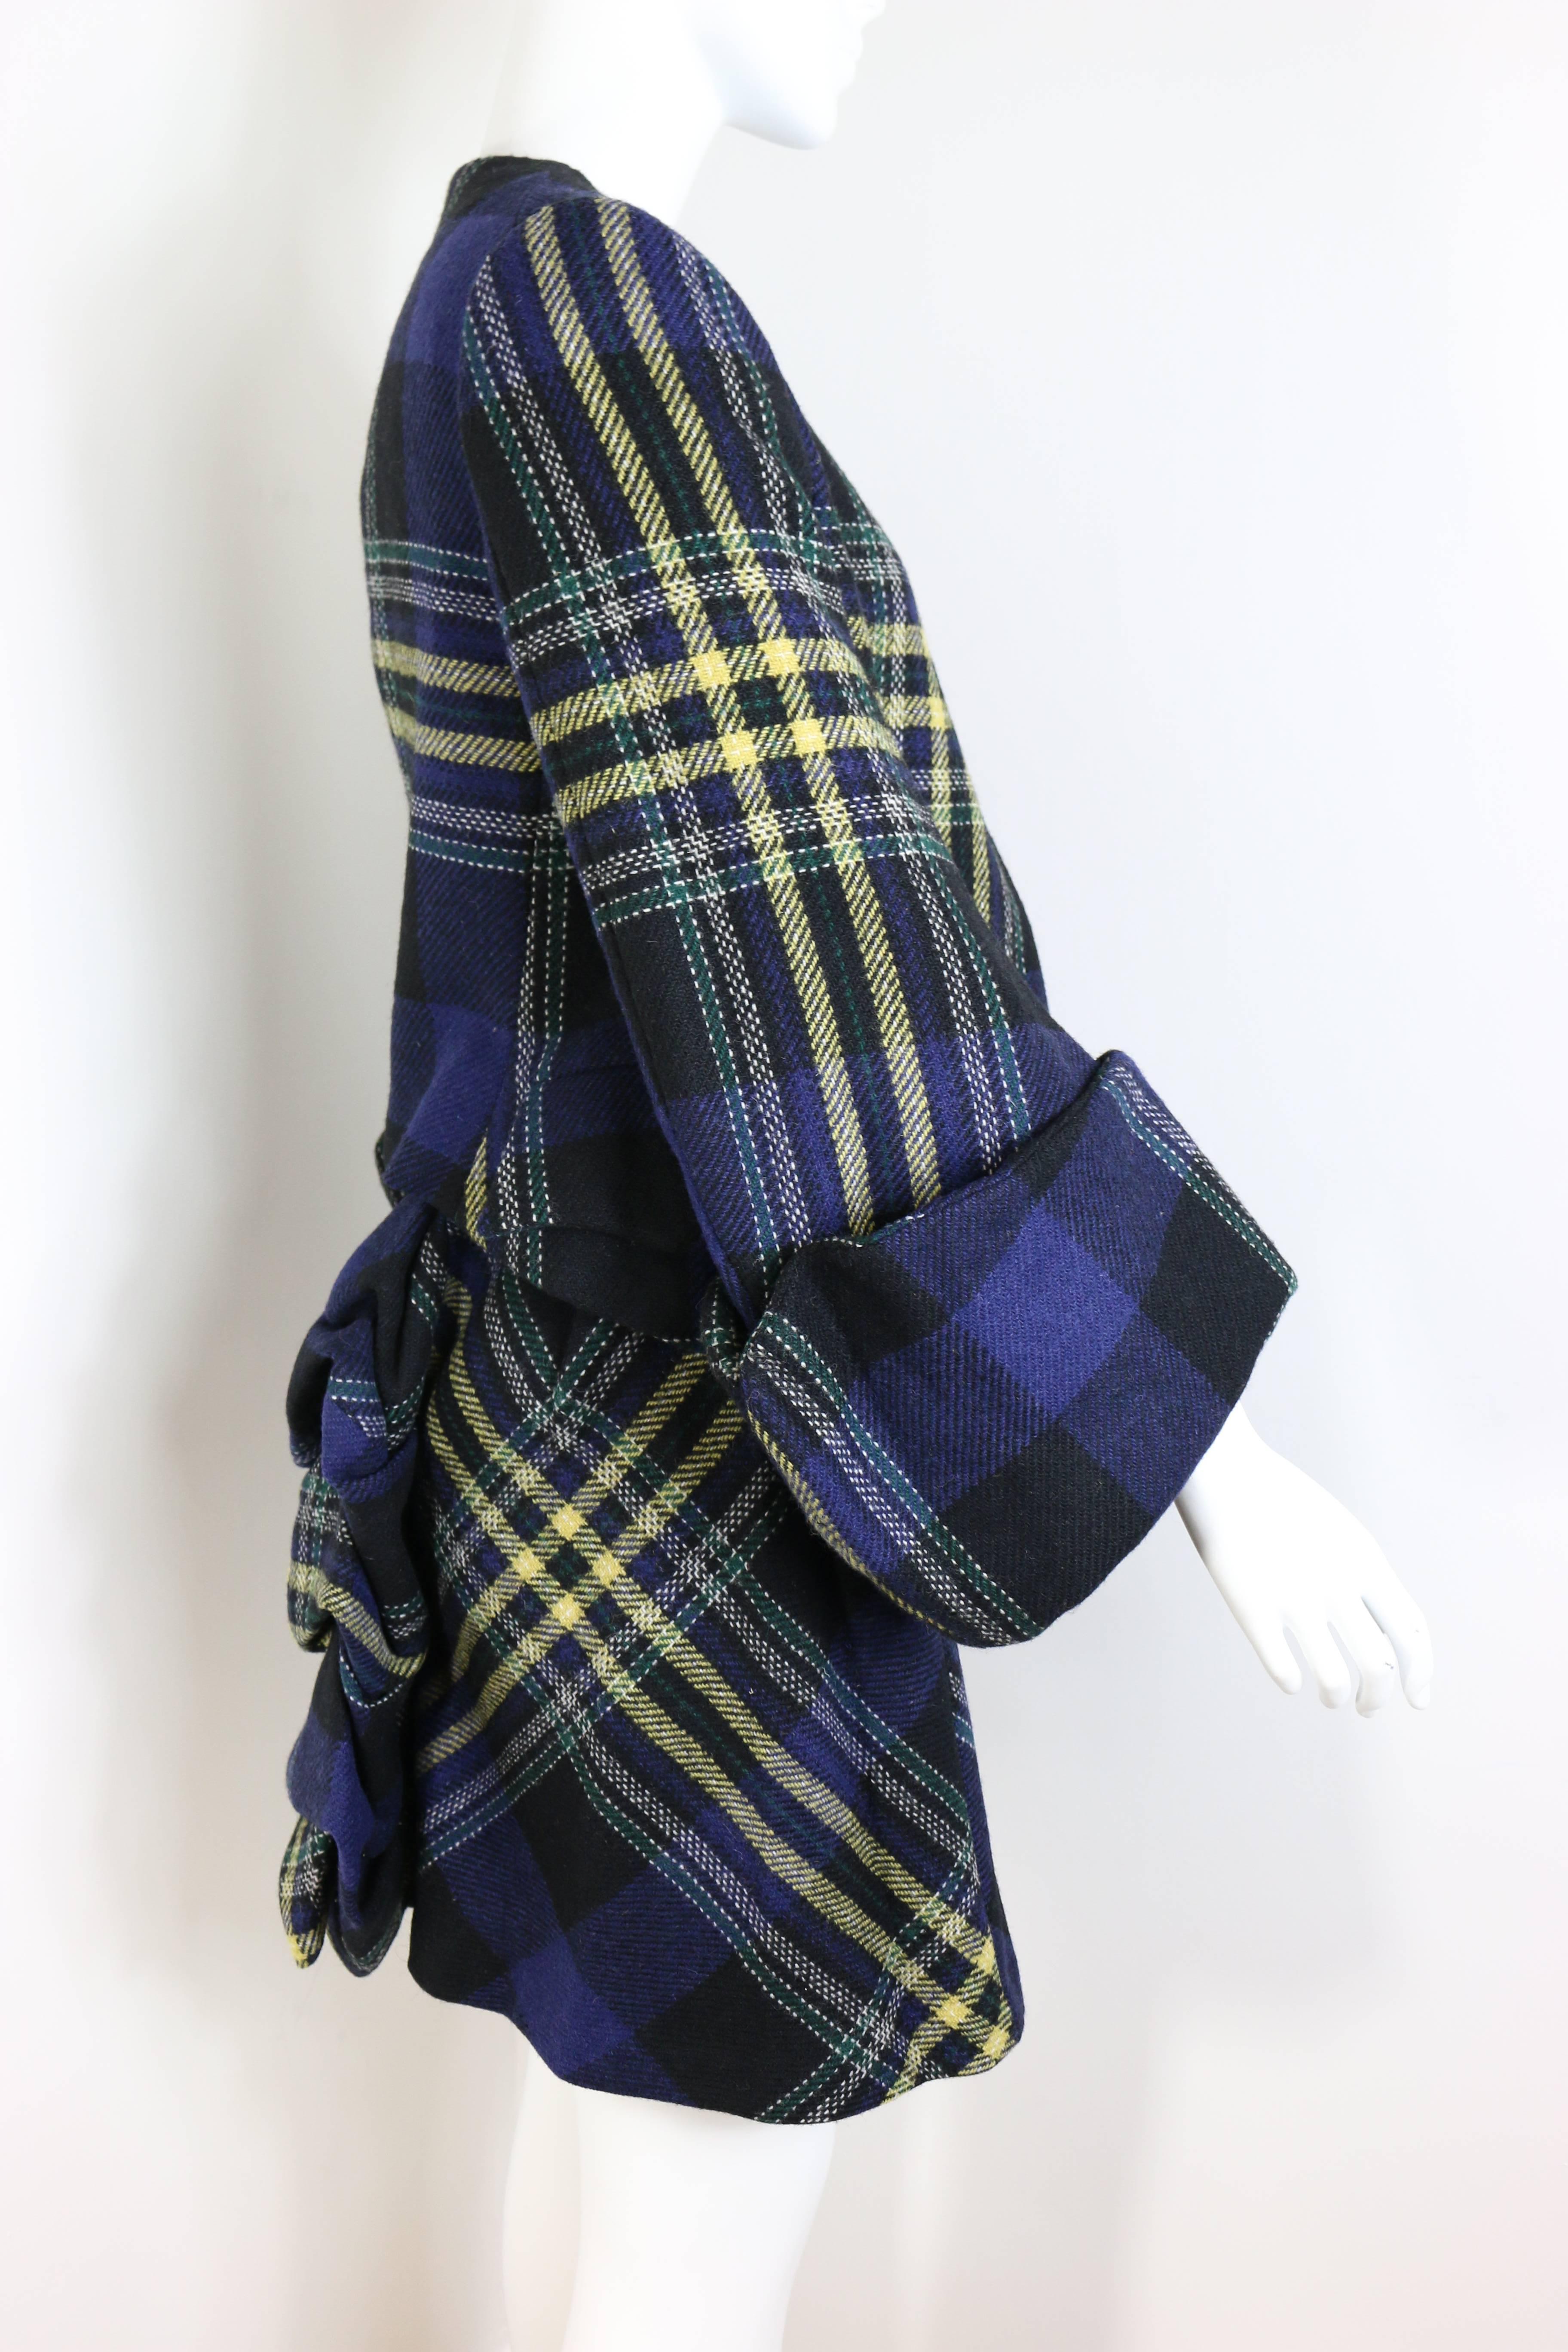 Iconic Vivienne Westwood Navy Wool Tartan Suit In Excellent Condition For Sale In Sheung Wan, HK